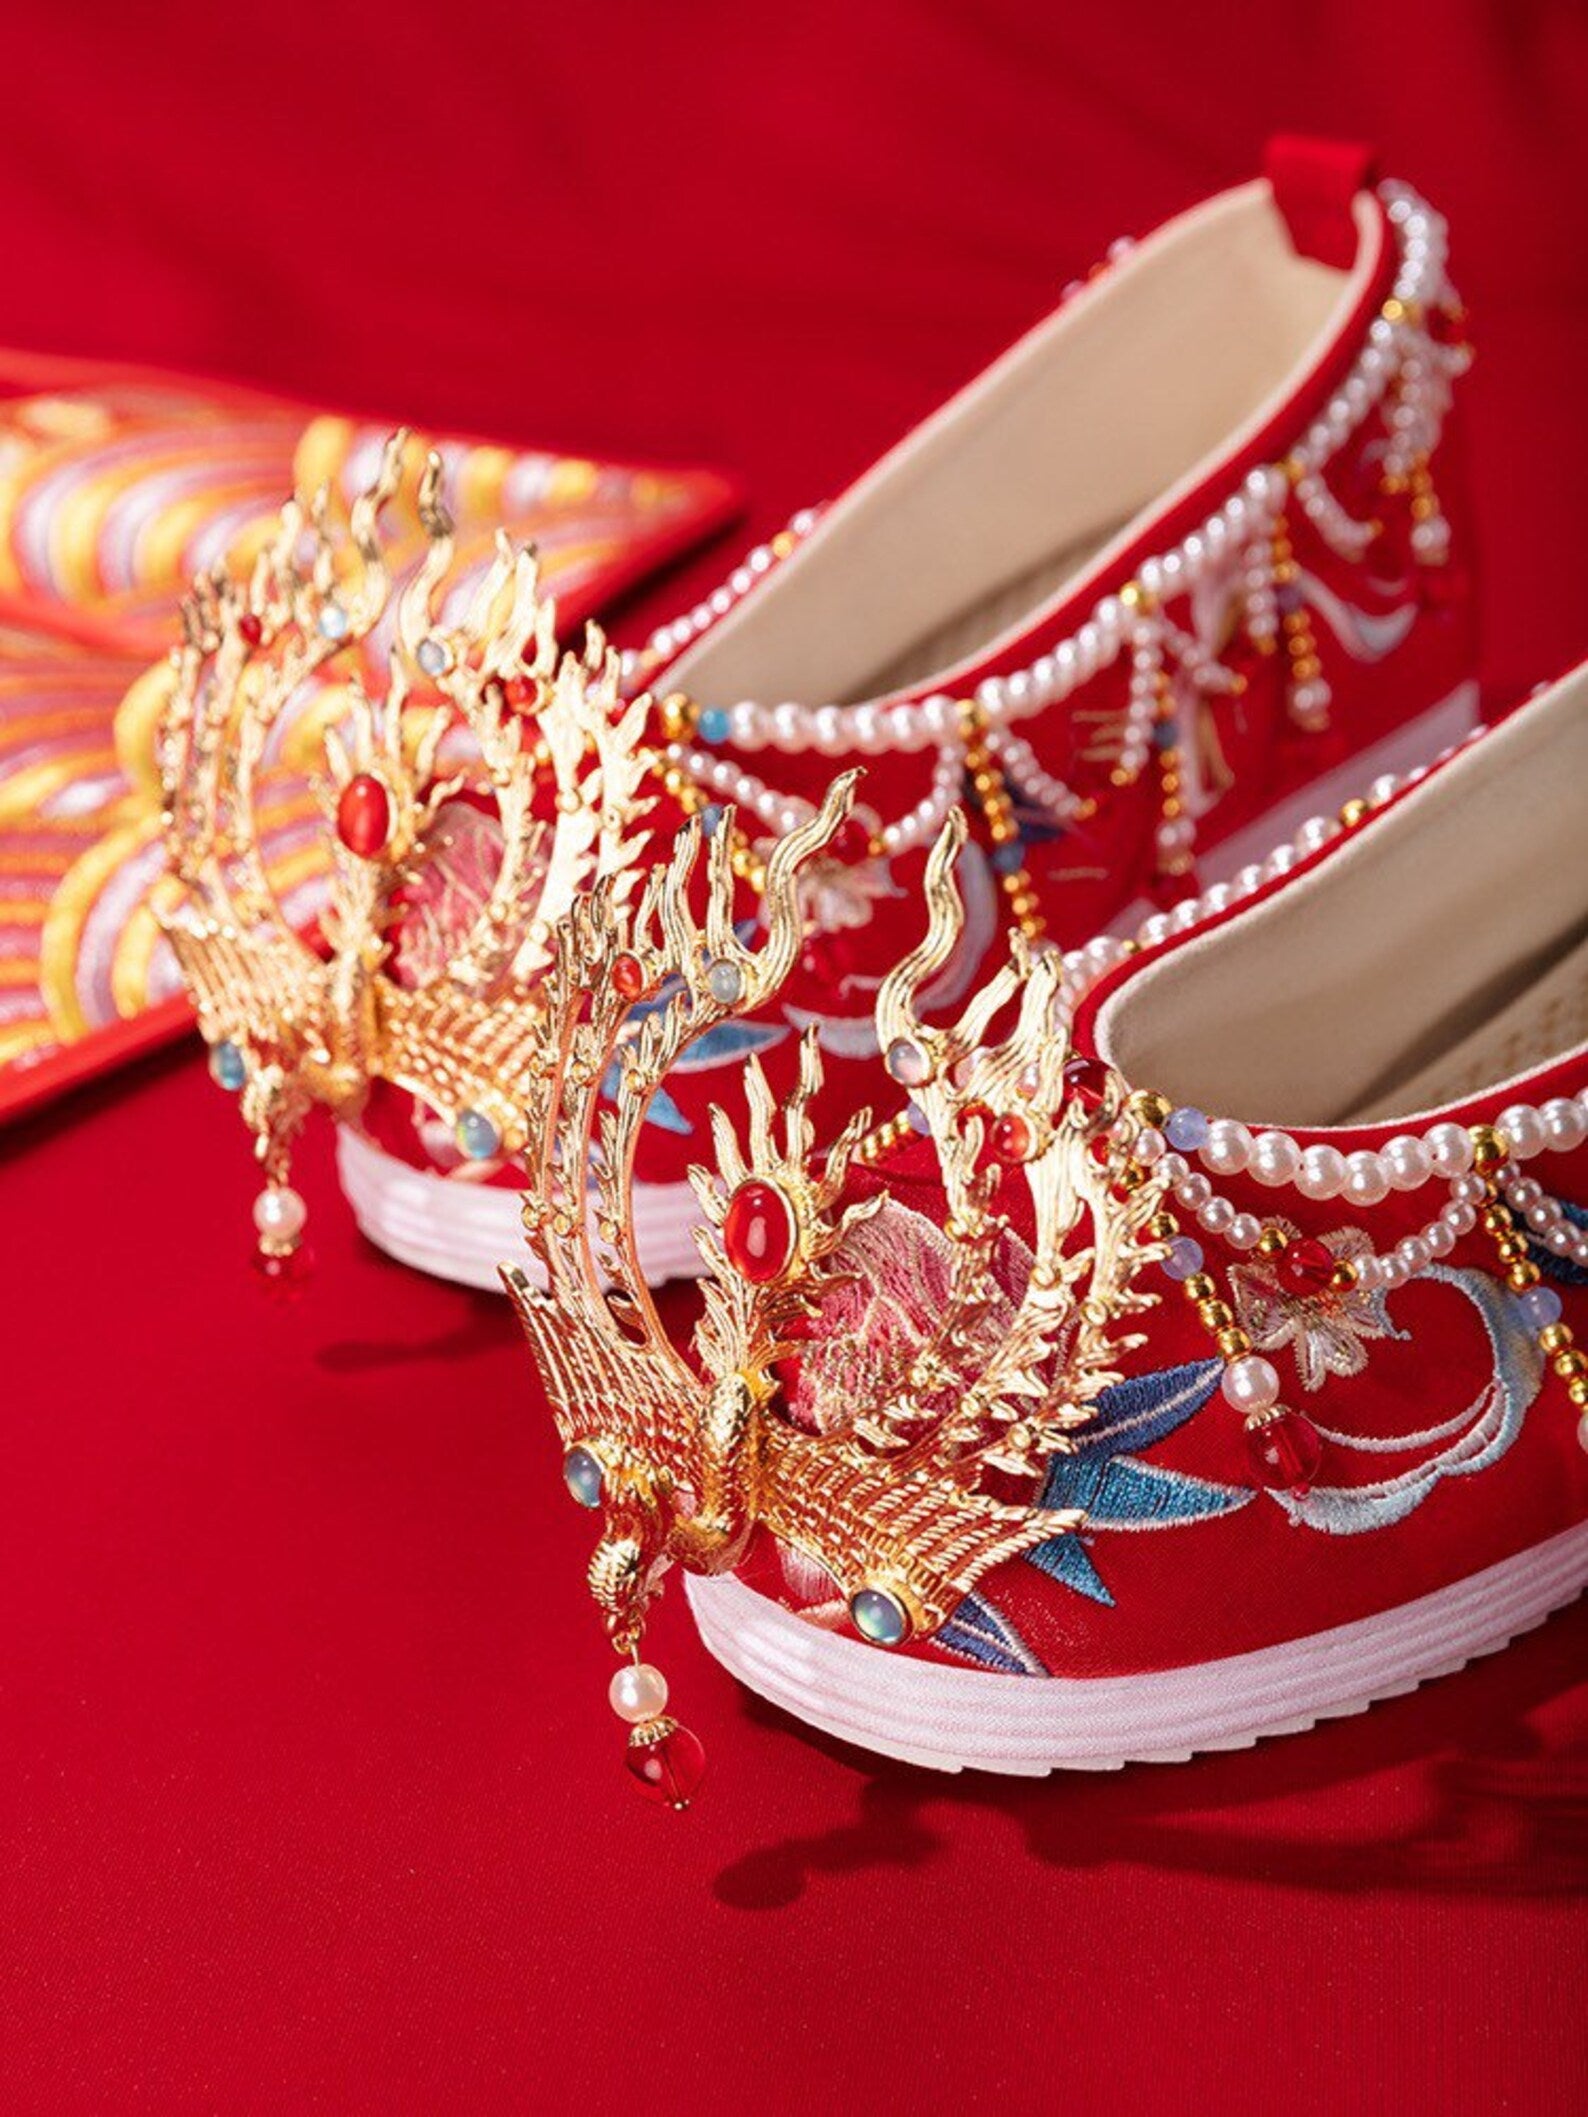 Red Cheongsam High Heel Chinese Wedding Shoes For Chinese Weddings A02294i  From Angelao, $28.82 | DHgate.Com